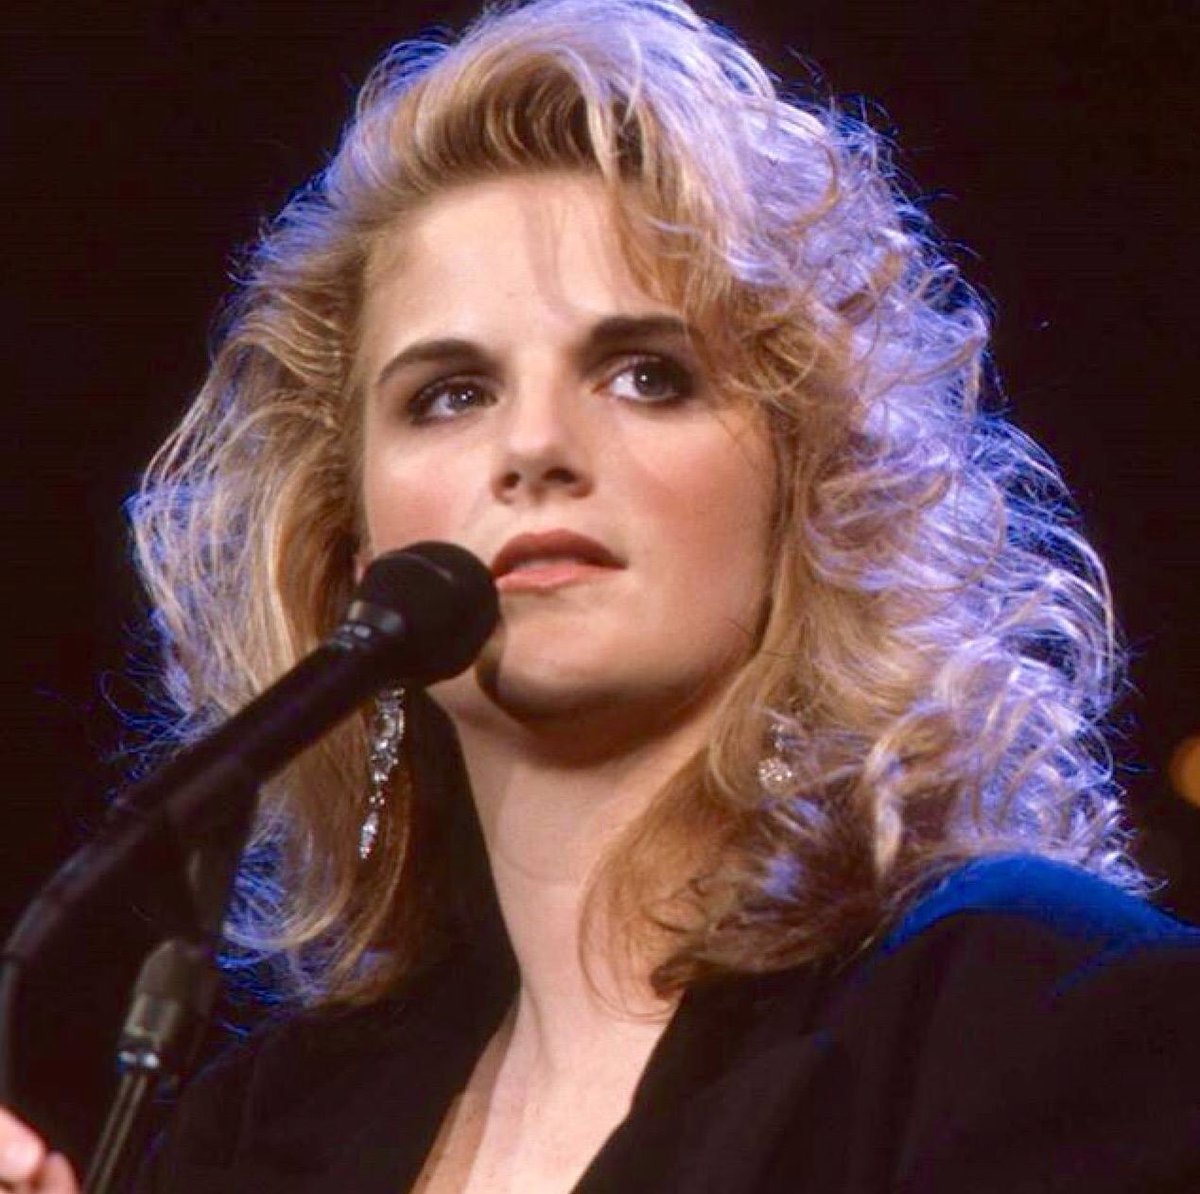 A great #TrishaTuesday pic from @trishayearwood's #AustinCityLimits appearance in the early 90's.... 

😍🎤🎹🎸🎻🎤😍  @AustinCityLimi3